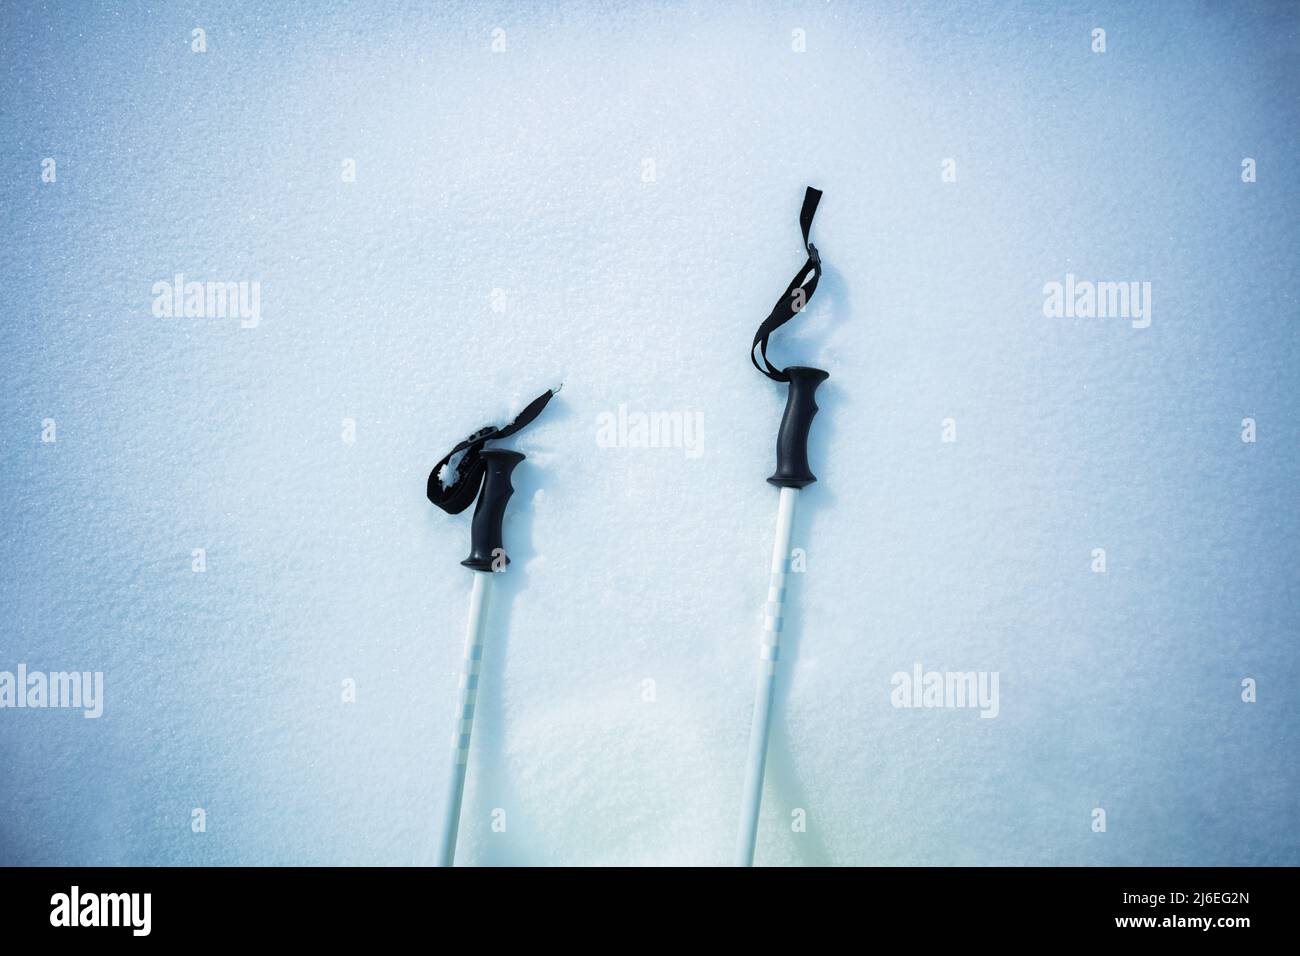 Details shot of a mountain ski poles pair in the snow from above Stock Photo